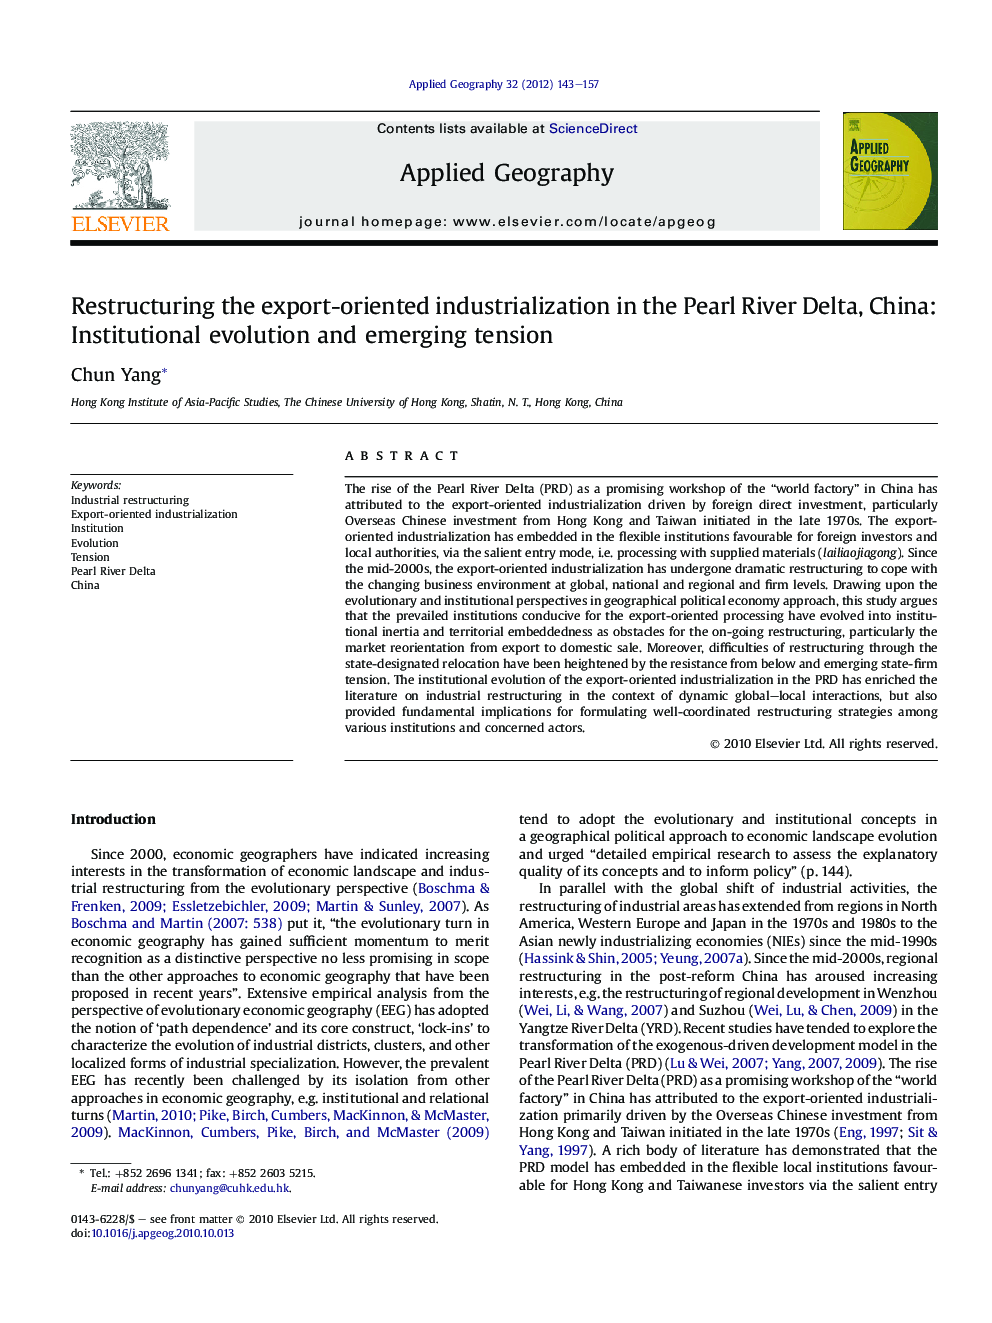 Restructuring the export-oriented industrialization in the Pearl River Delta, China: Institutional evolution and emerging tension